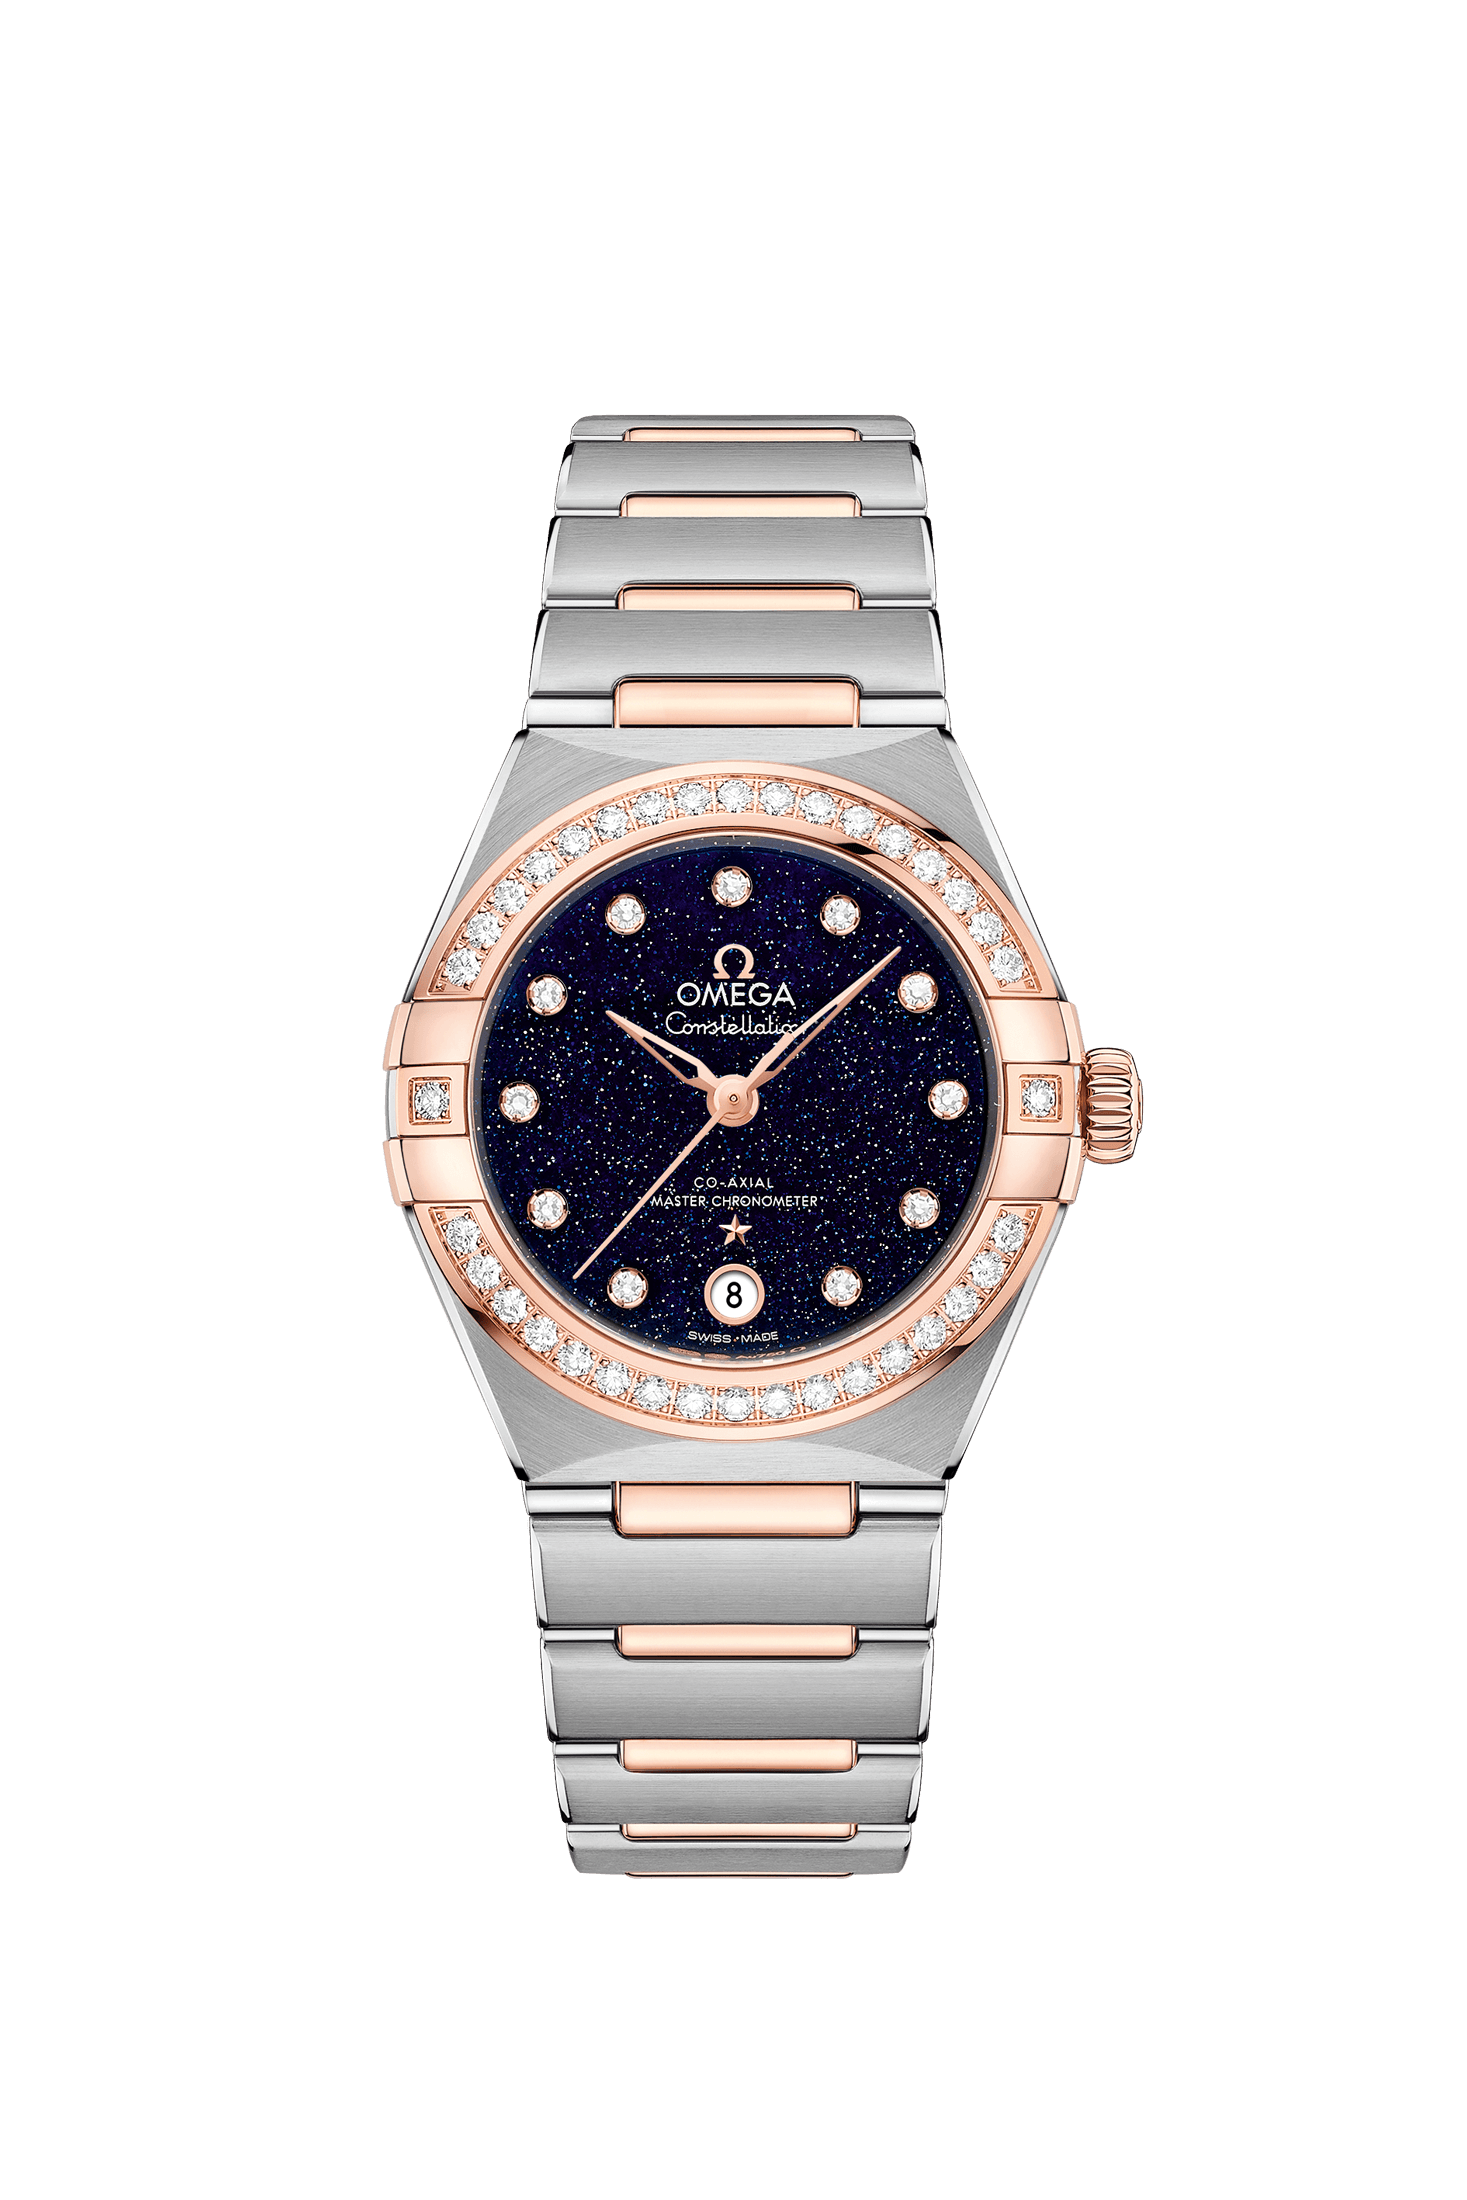 Ladies' watch  OMEGA, Constellation Co Axial Master Chronometer / 29mm, SKU: 131.25.29.20.53.002 | watchapproach.com